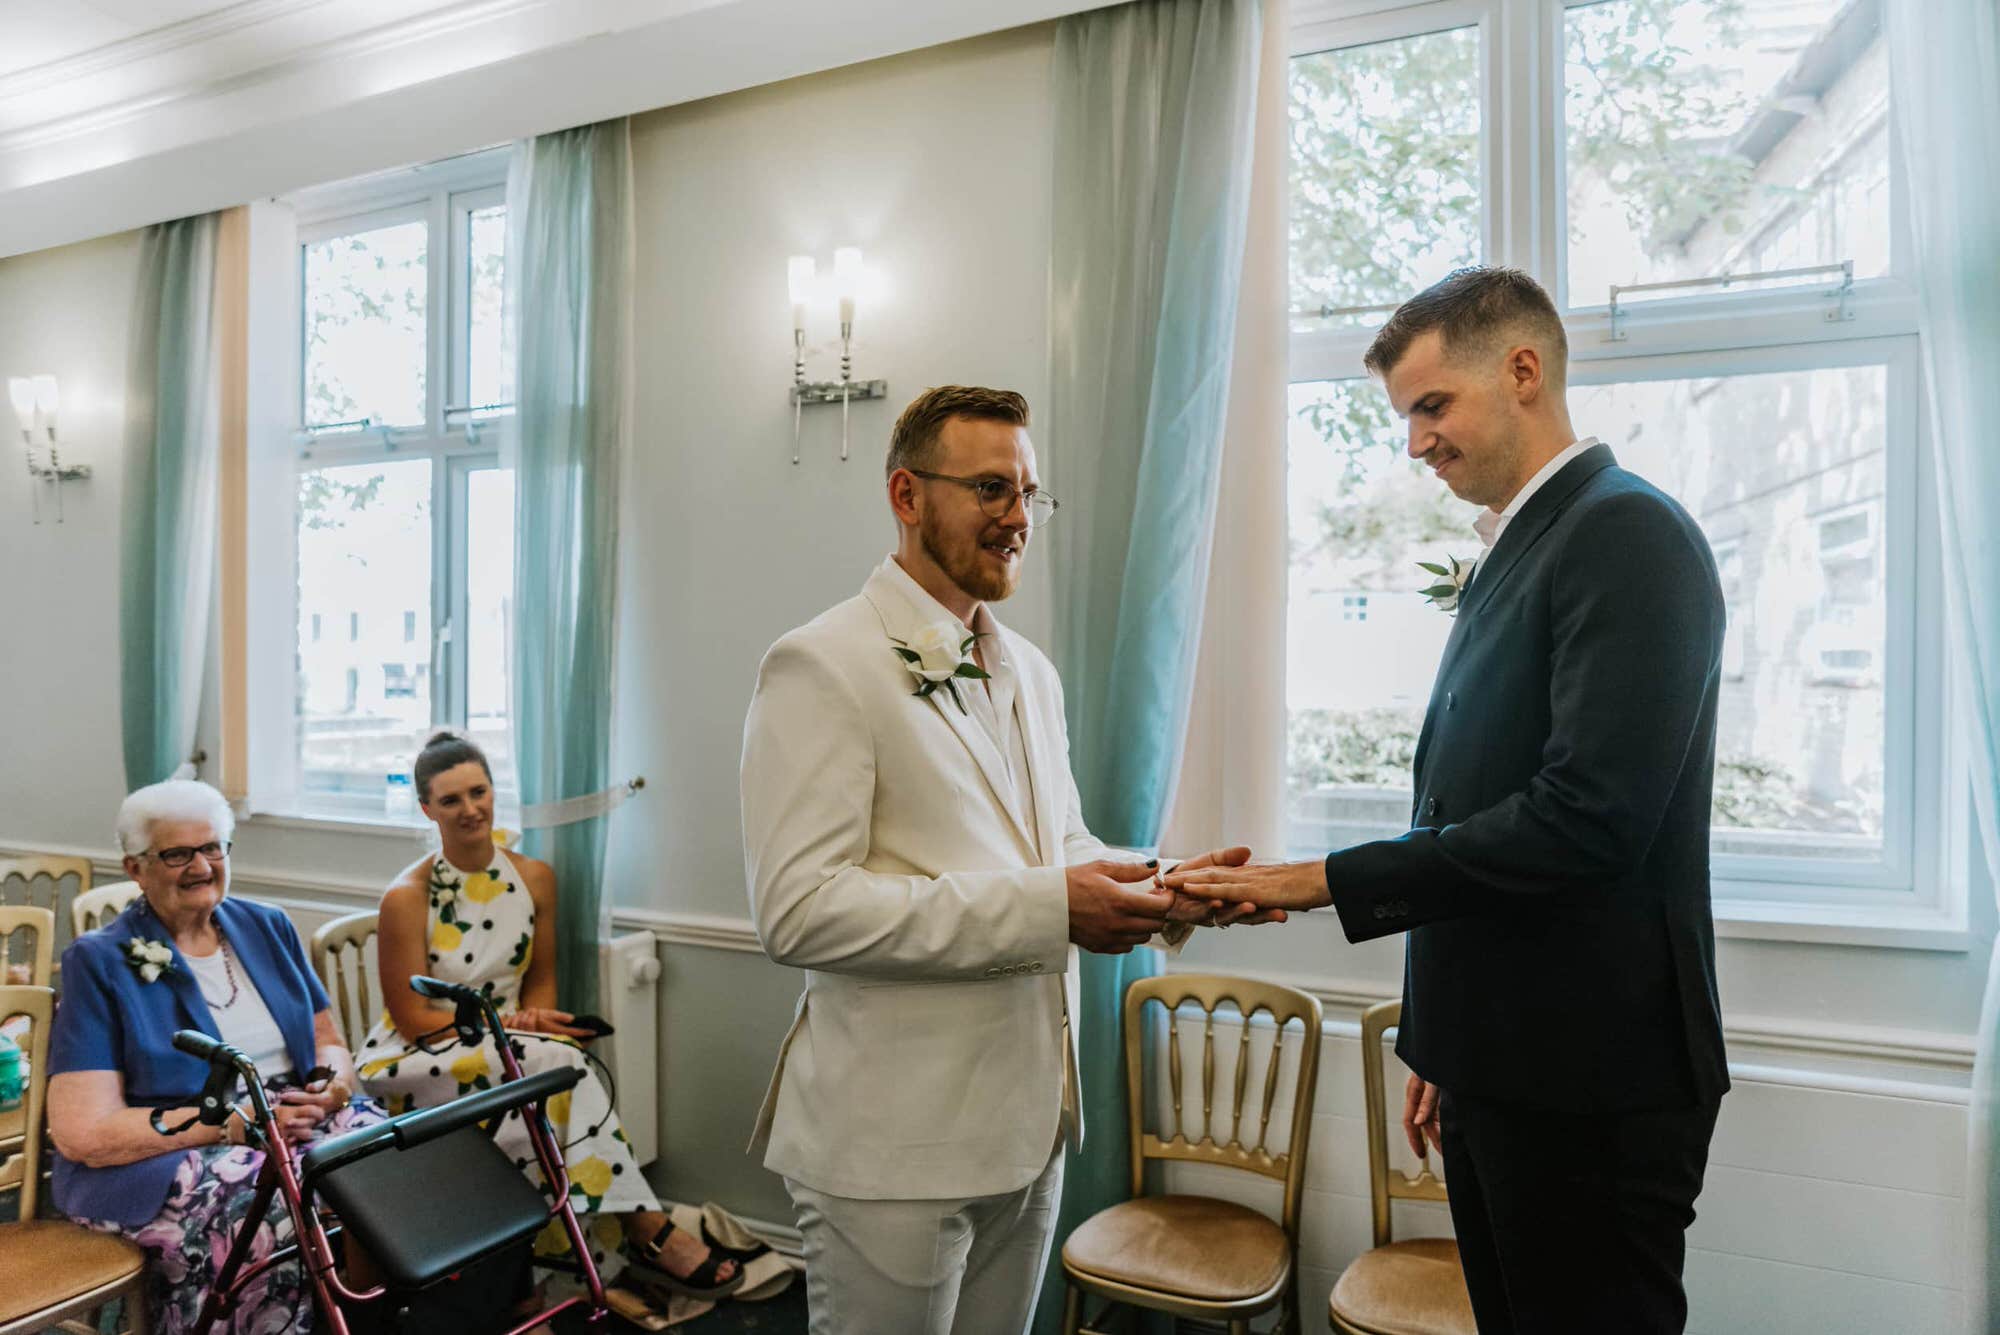 ring exchange at the town hall room, green curtains